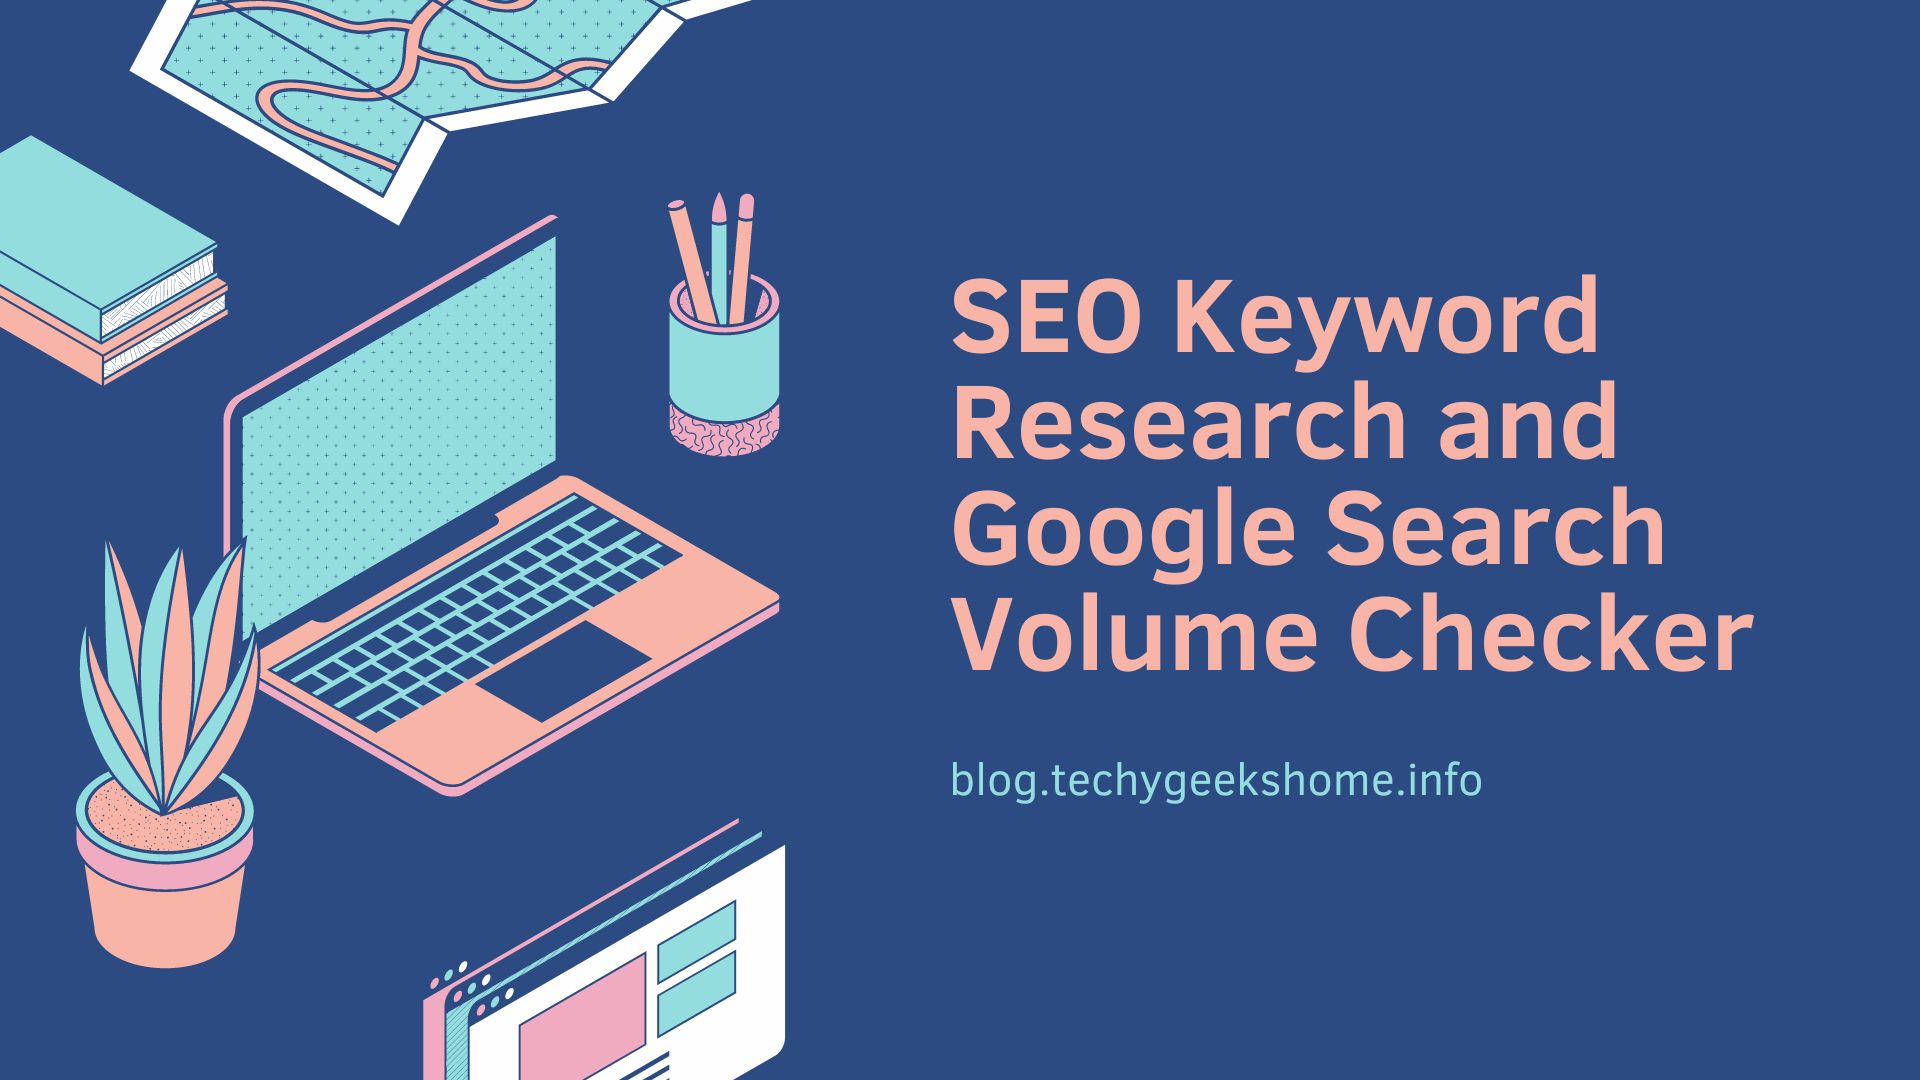 SEO Keyword Research and Google Search Volume Checker 2